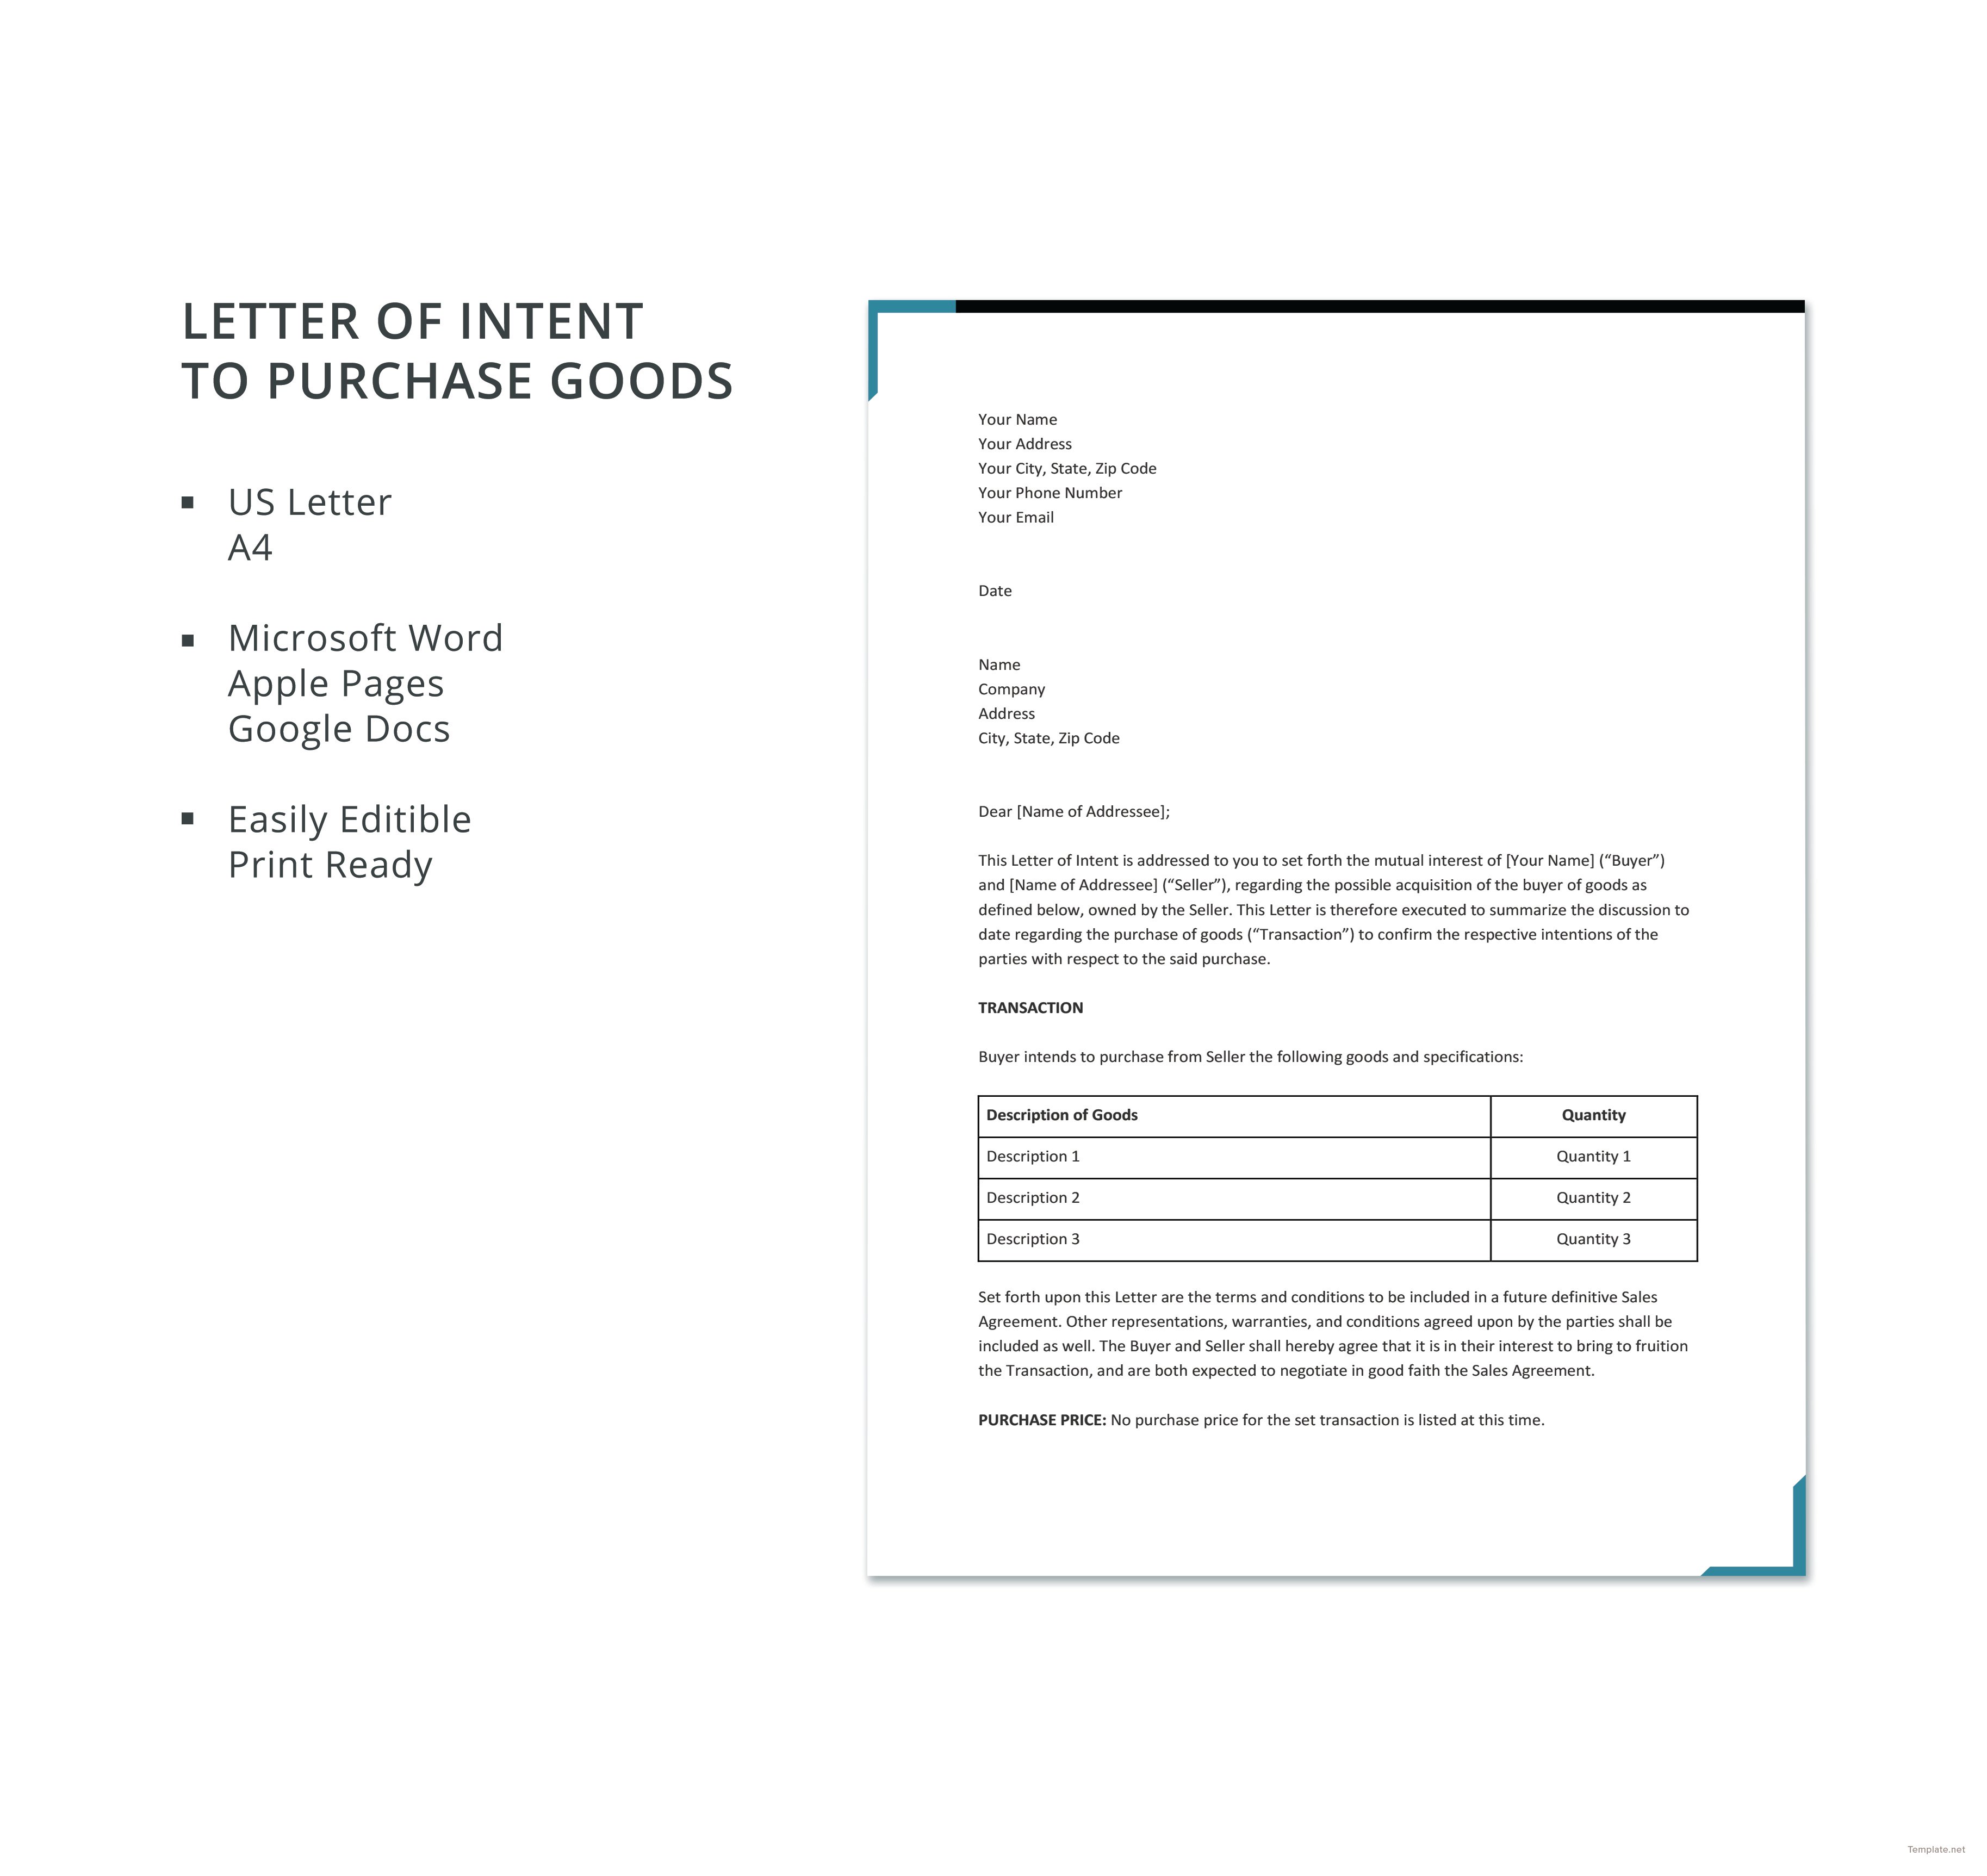 Letter of Intent to Purchase Goods Template in Microsoft Word, Apple